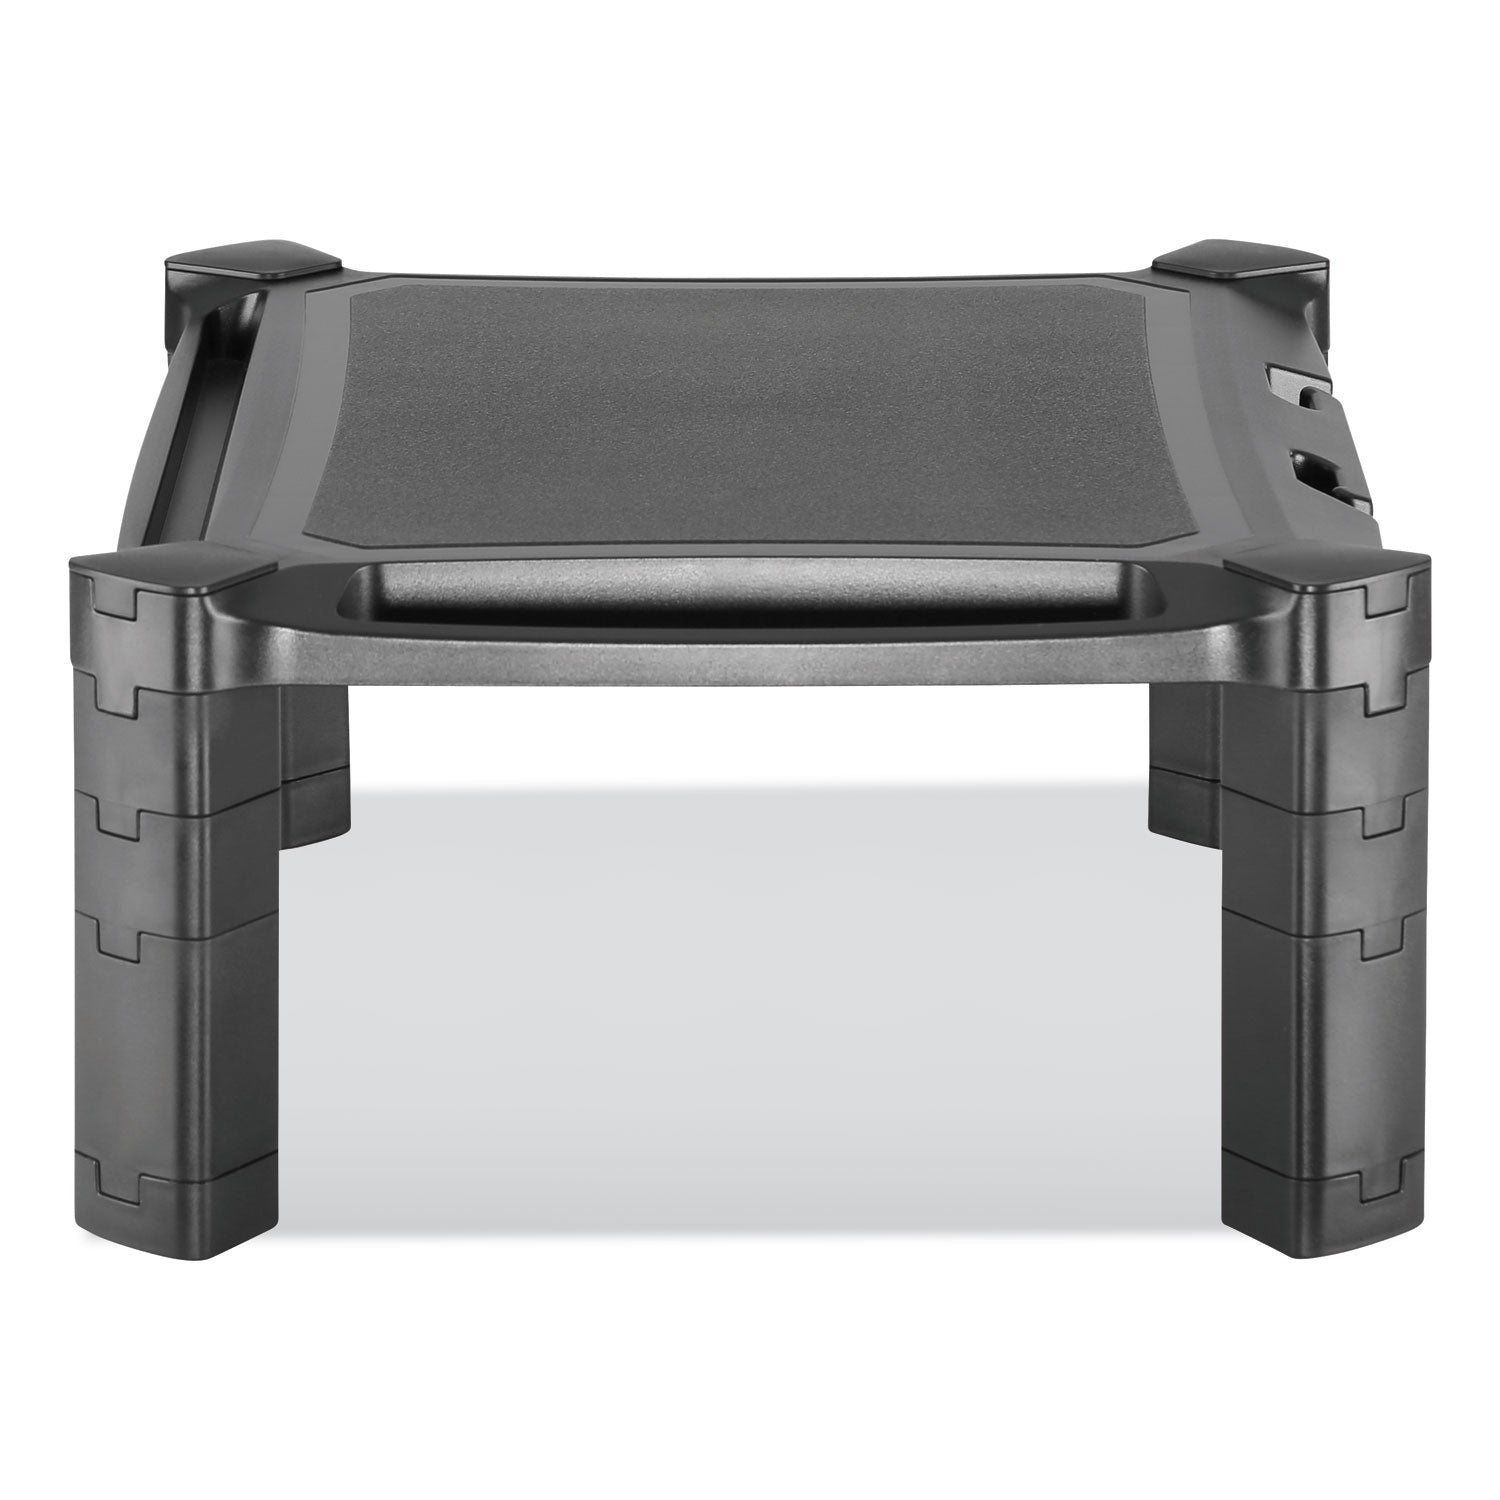 large-monitor-stand-with-cable-management-1299-x-171-x-66-black-supports-22-lbs_ivr55051 - 2